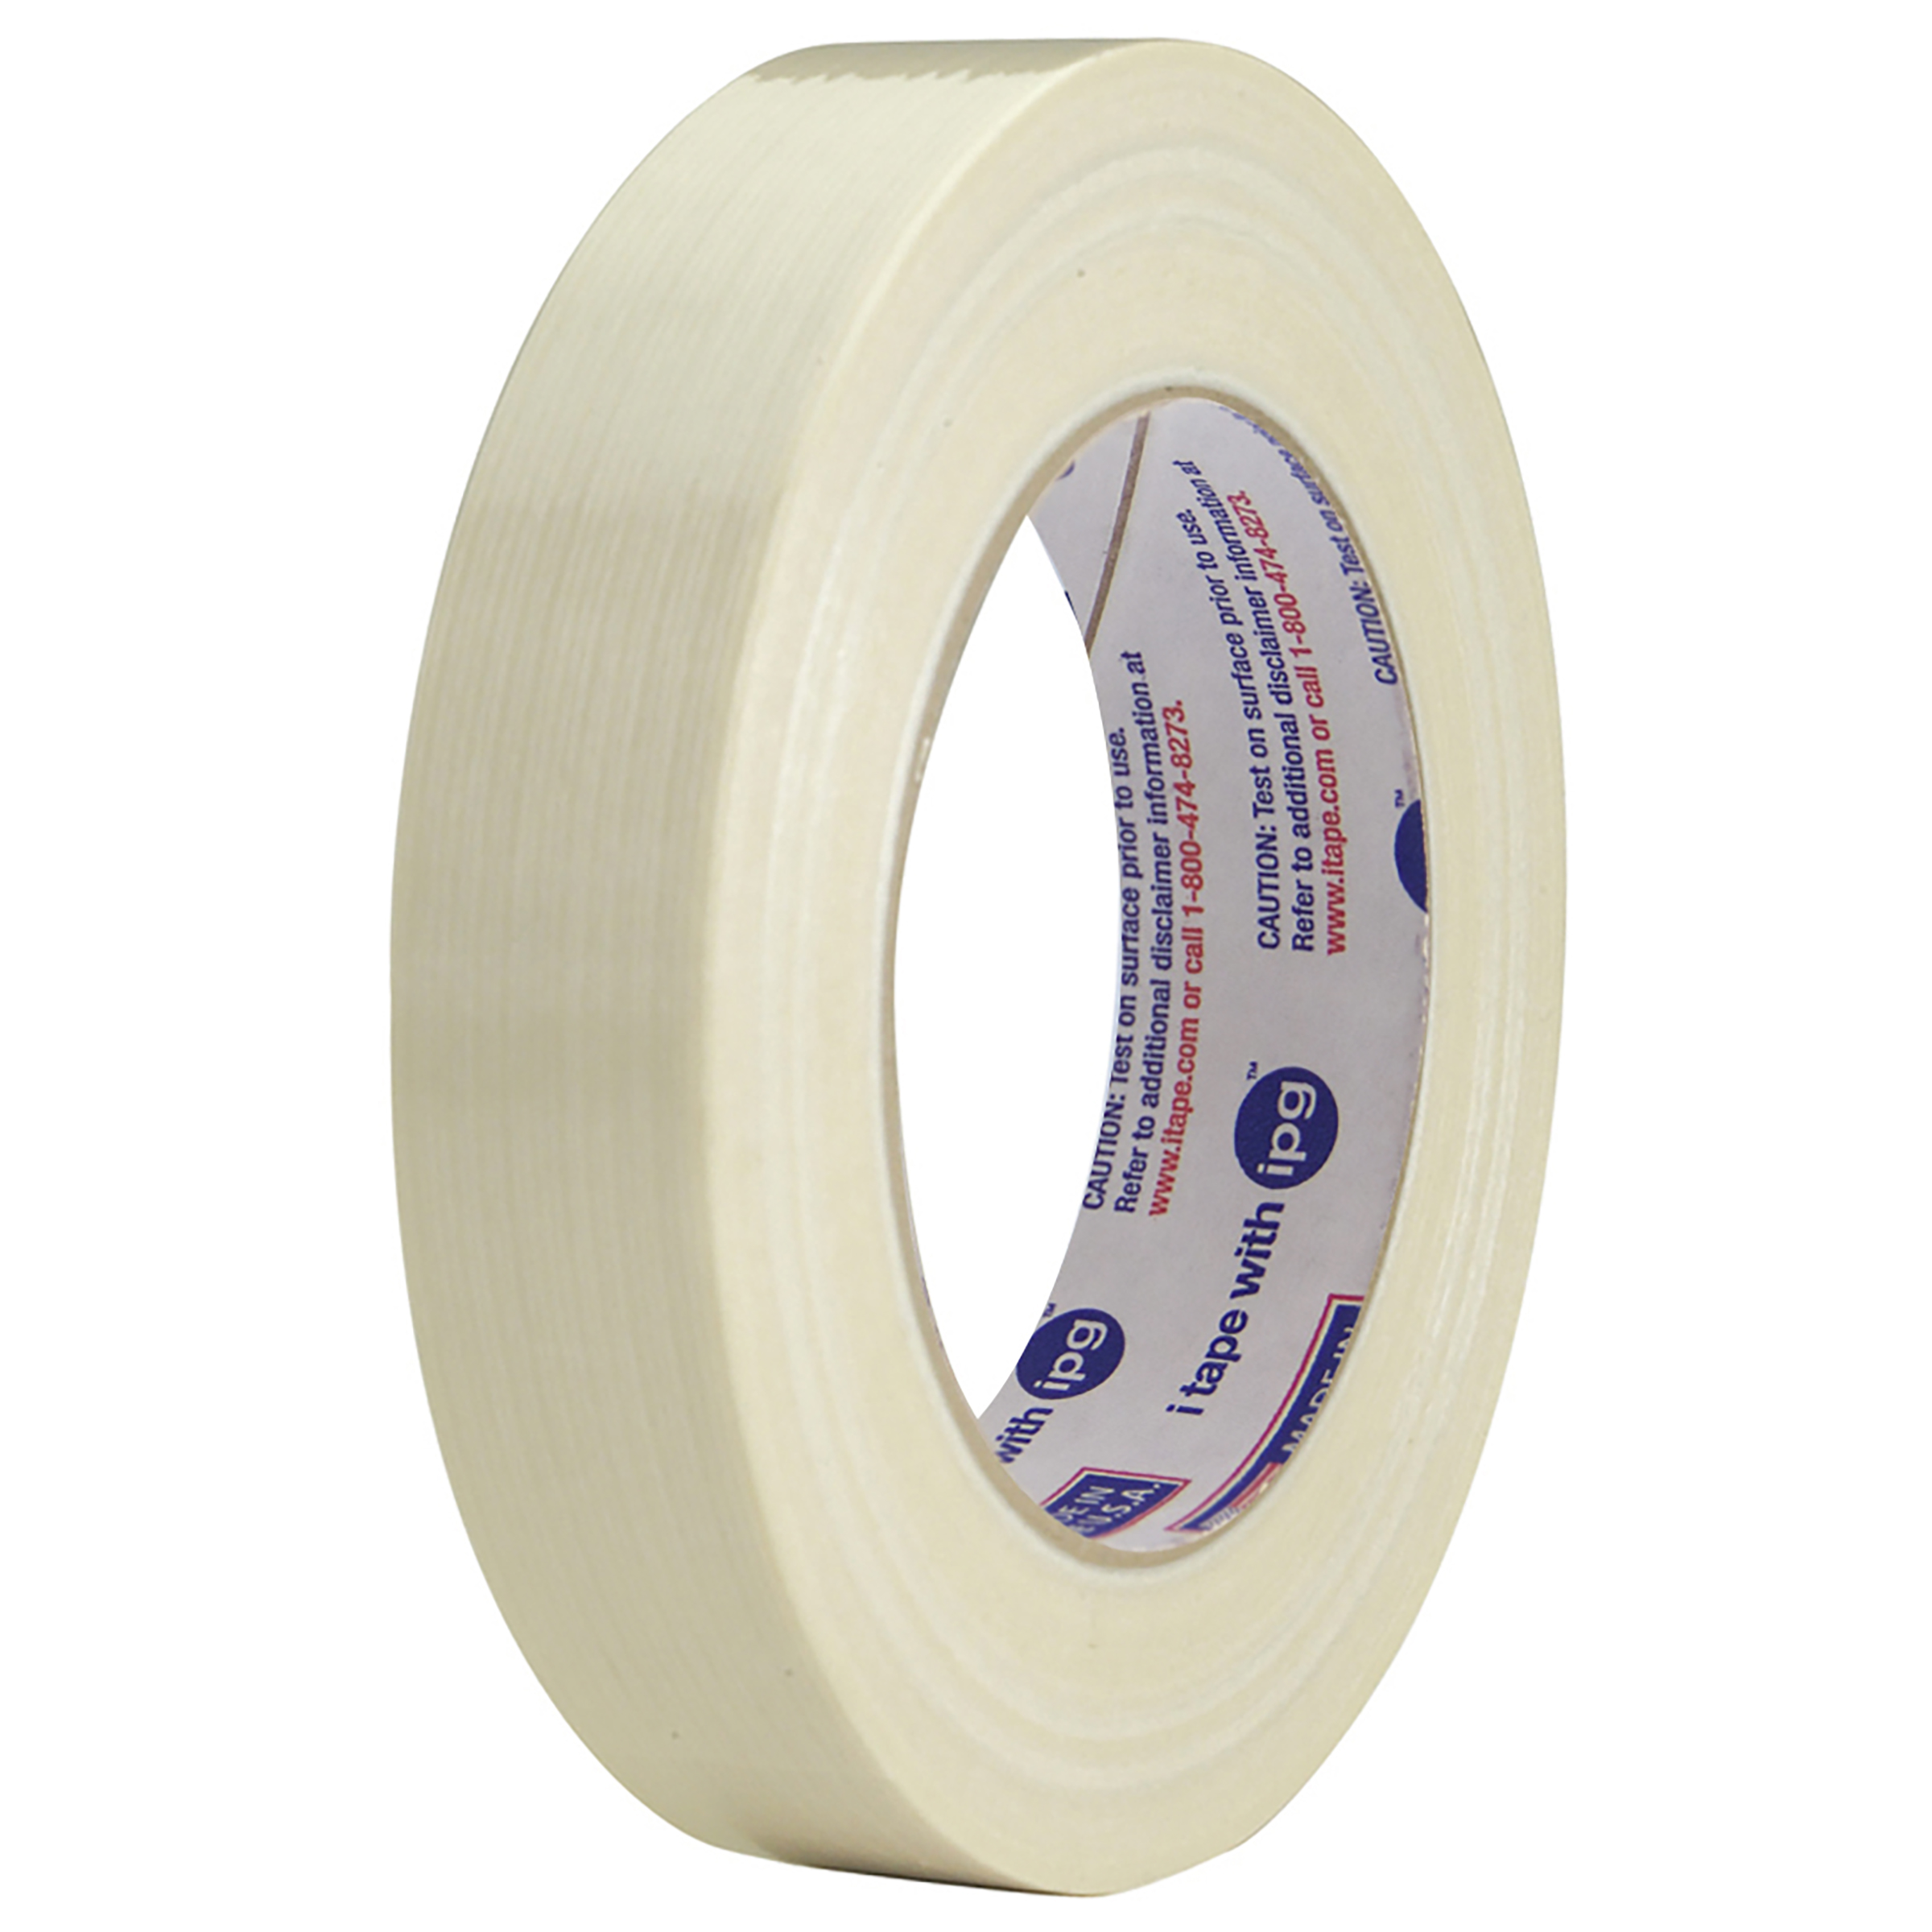 Gaffer Power Clear Filament Duct Tape, Heavy Duty Waterproof Strapping  Tape for Repairs, Sealing, Shipping, Packing, Residential, Commercial and  Industrial Uses